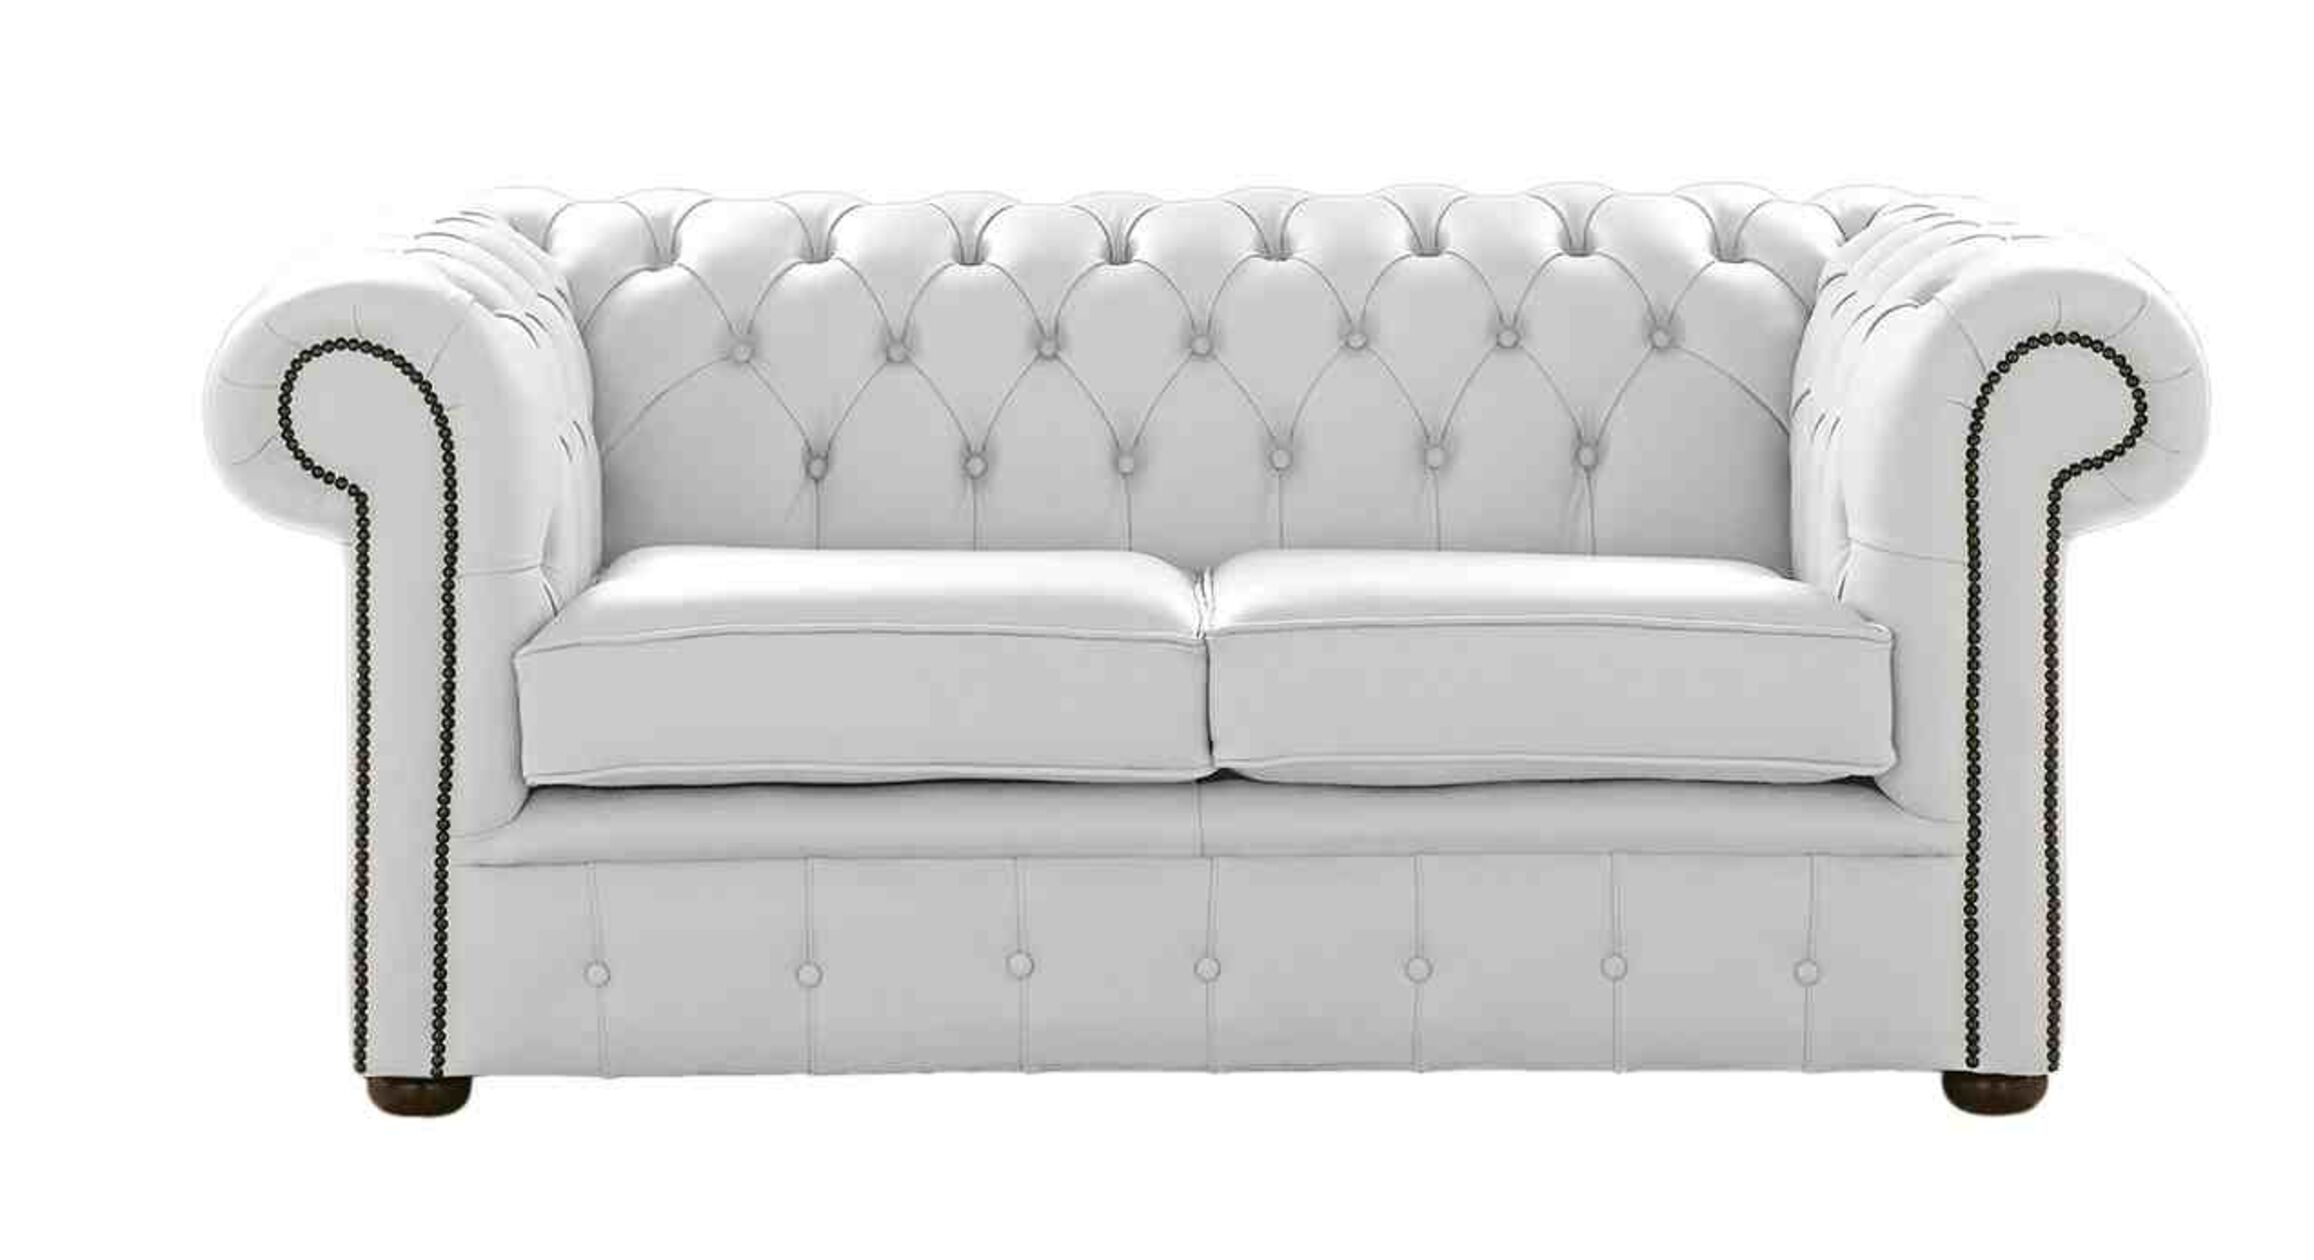 white leather chesterfield sofas white leather chesterfield sofa